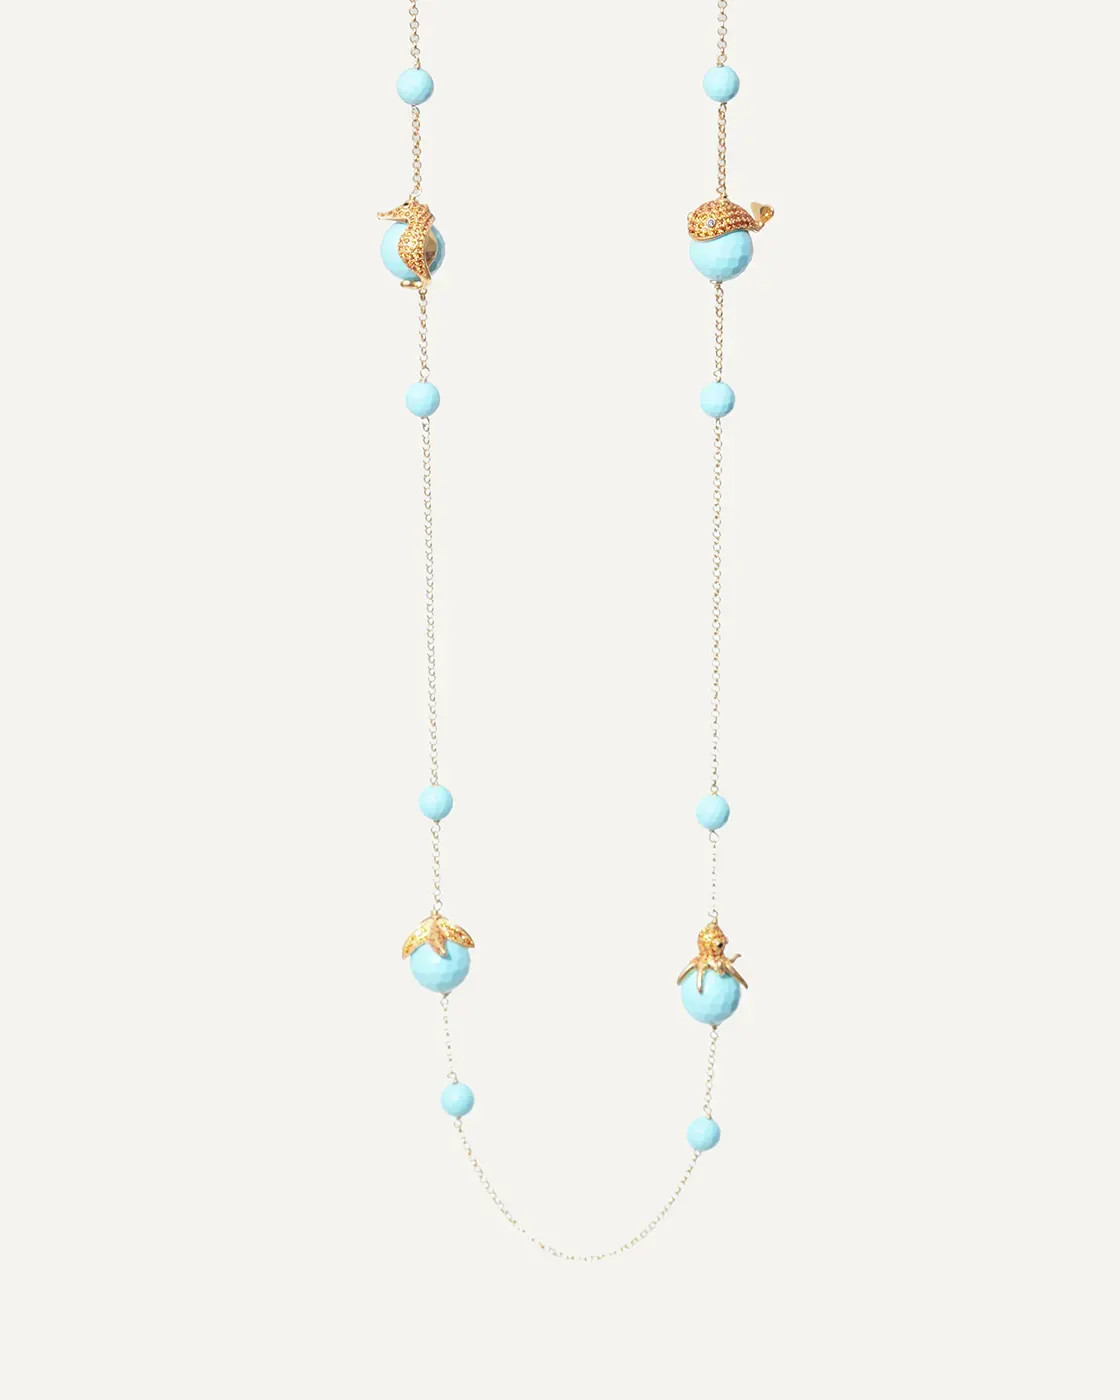 Krill Sterling Silver Necklace with Turquoise